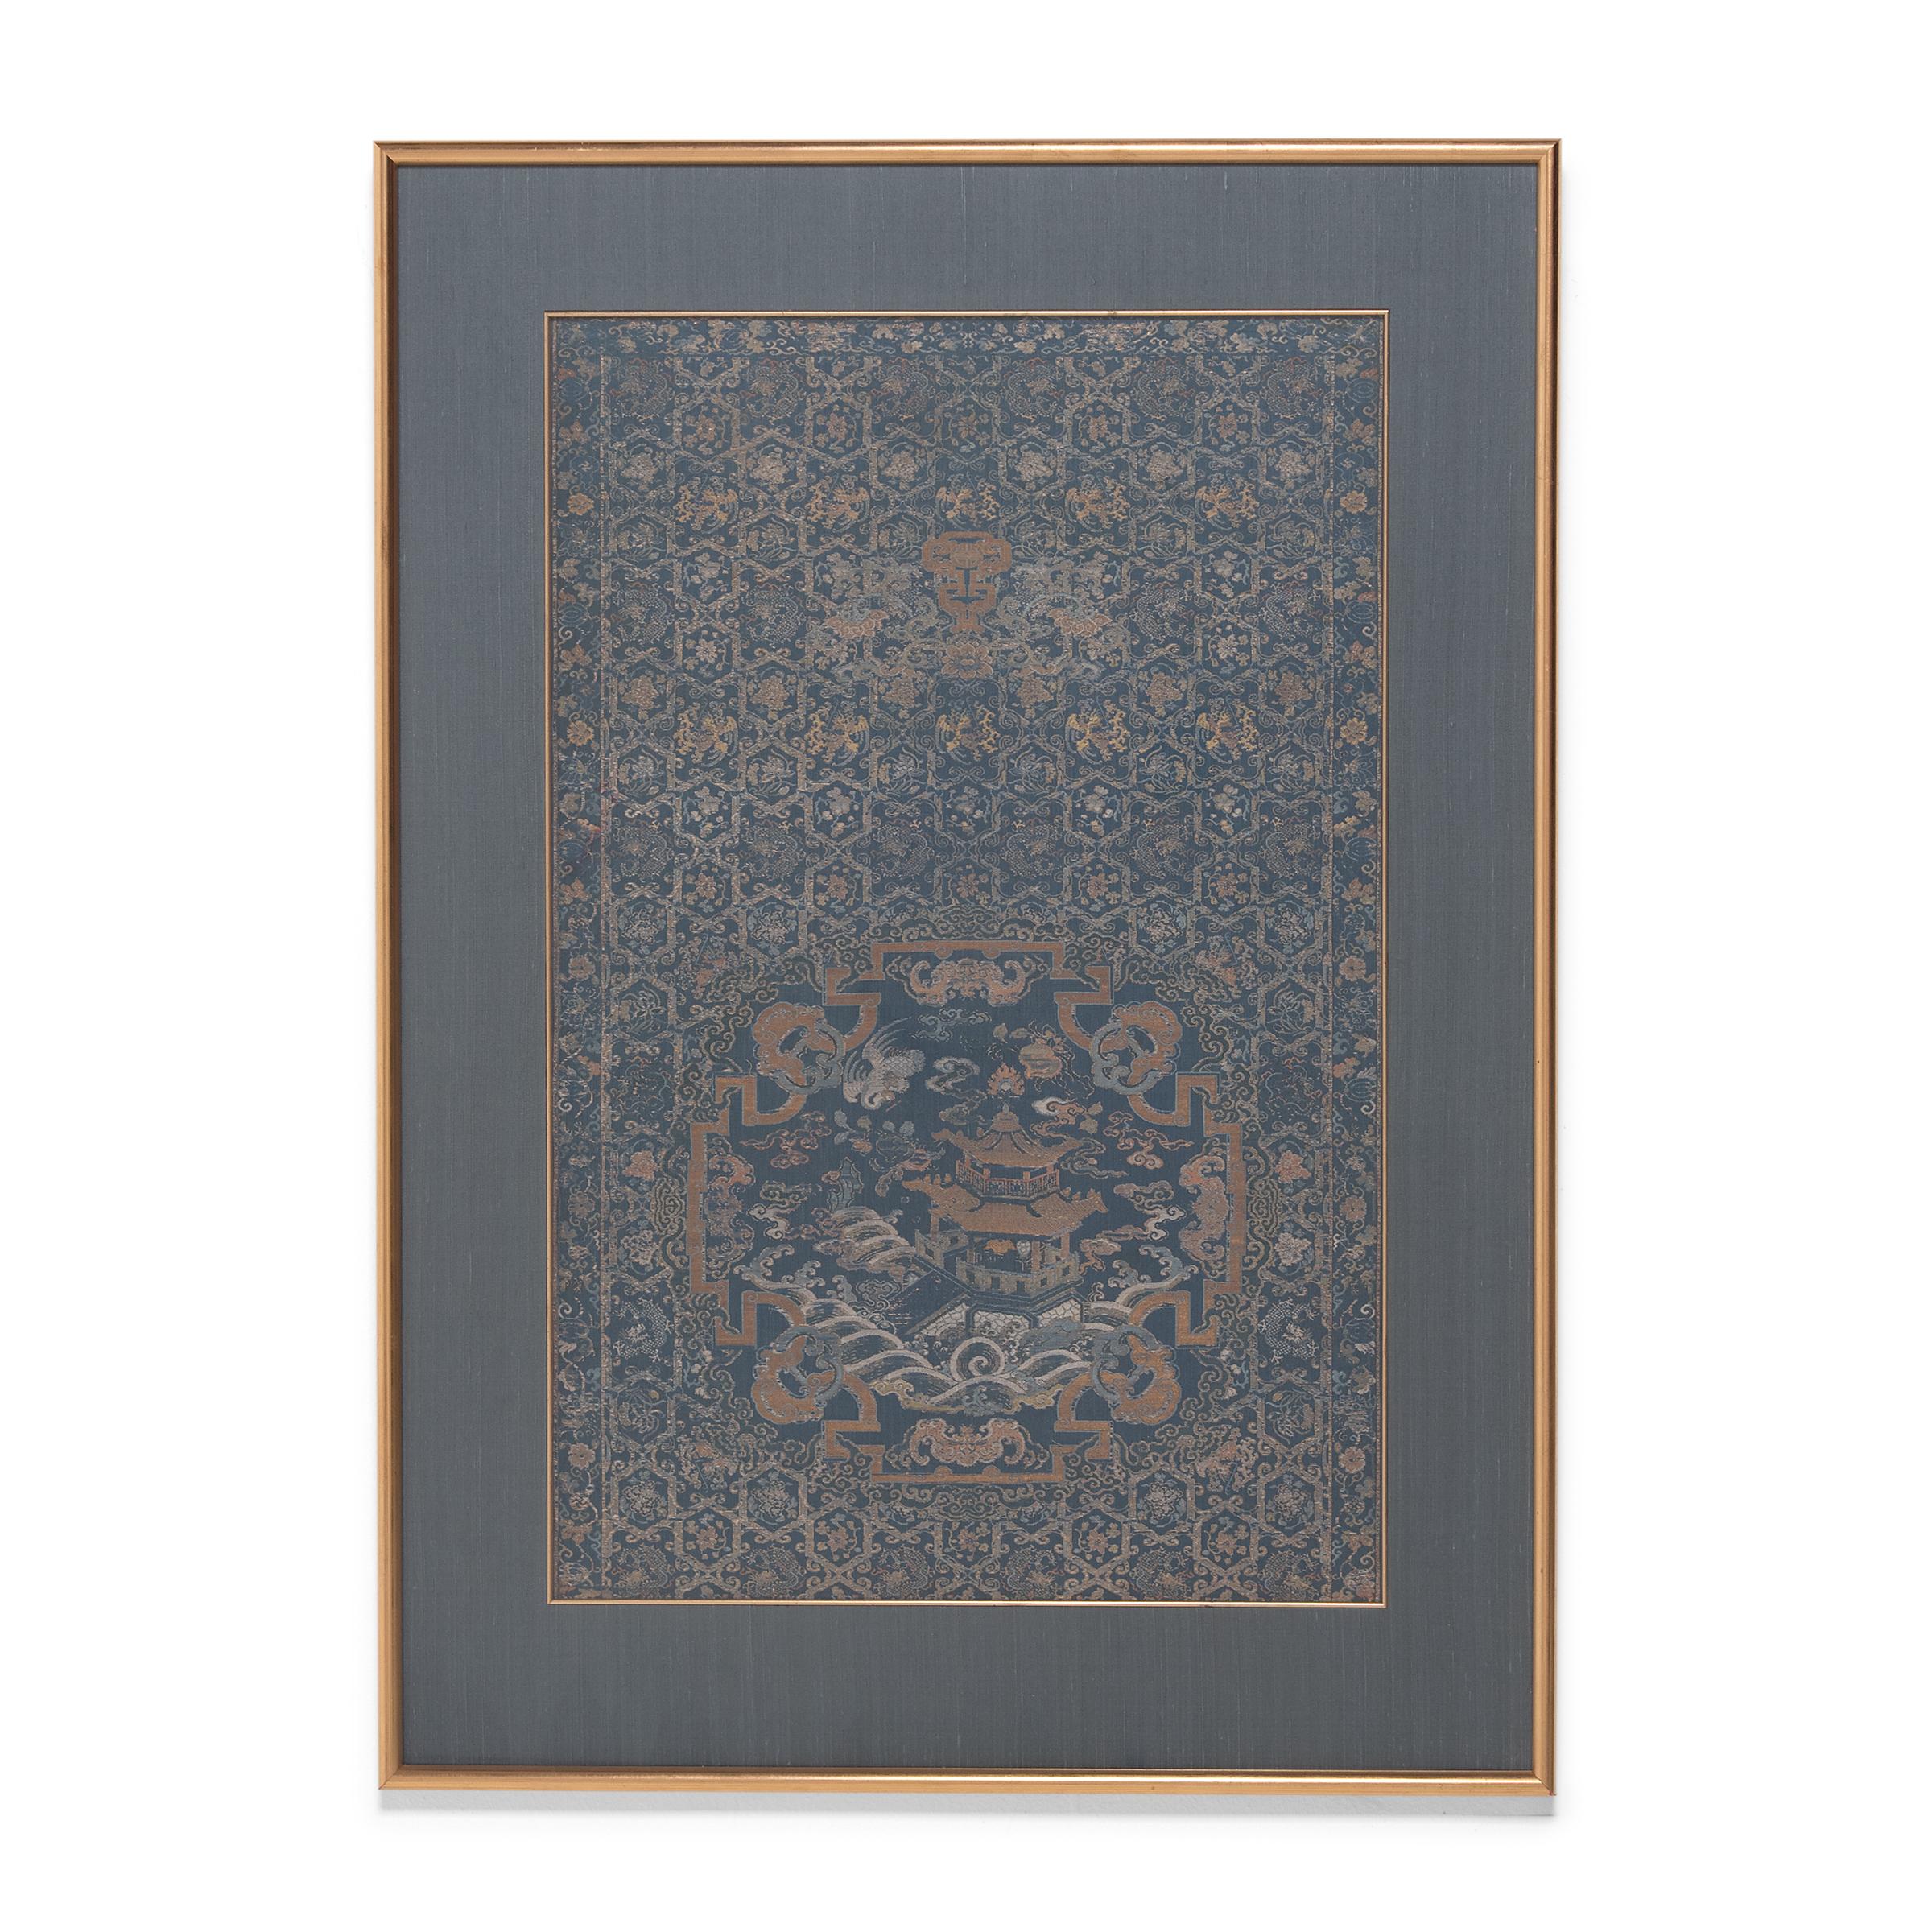 These framed silk brocade tapestries are two halves of a magnificent Qing-dynasty chair panel, or chair strip. Because traditional Chinese seating was not upholstered, Fine textiles were draped across the backs and seats of grand armchairs for added